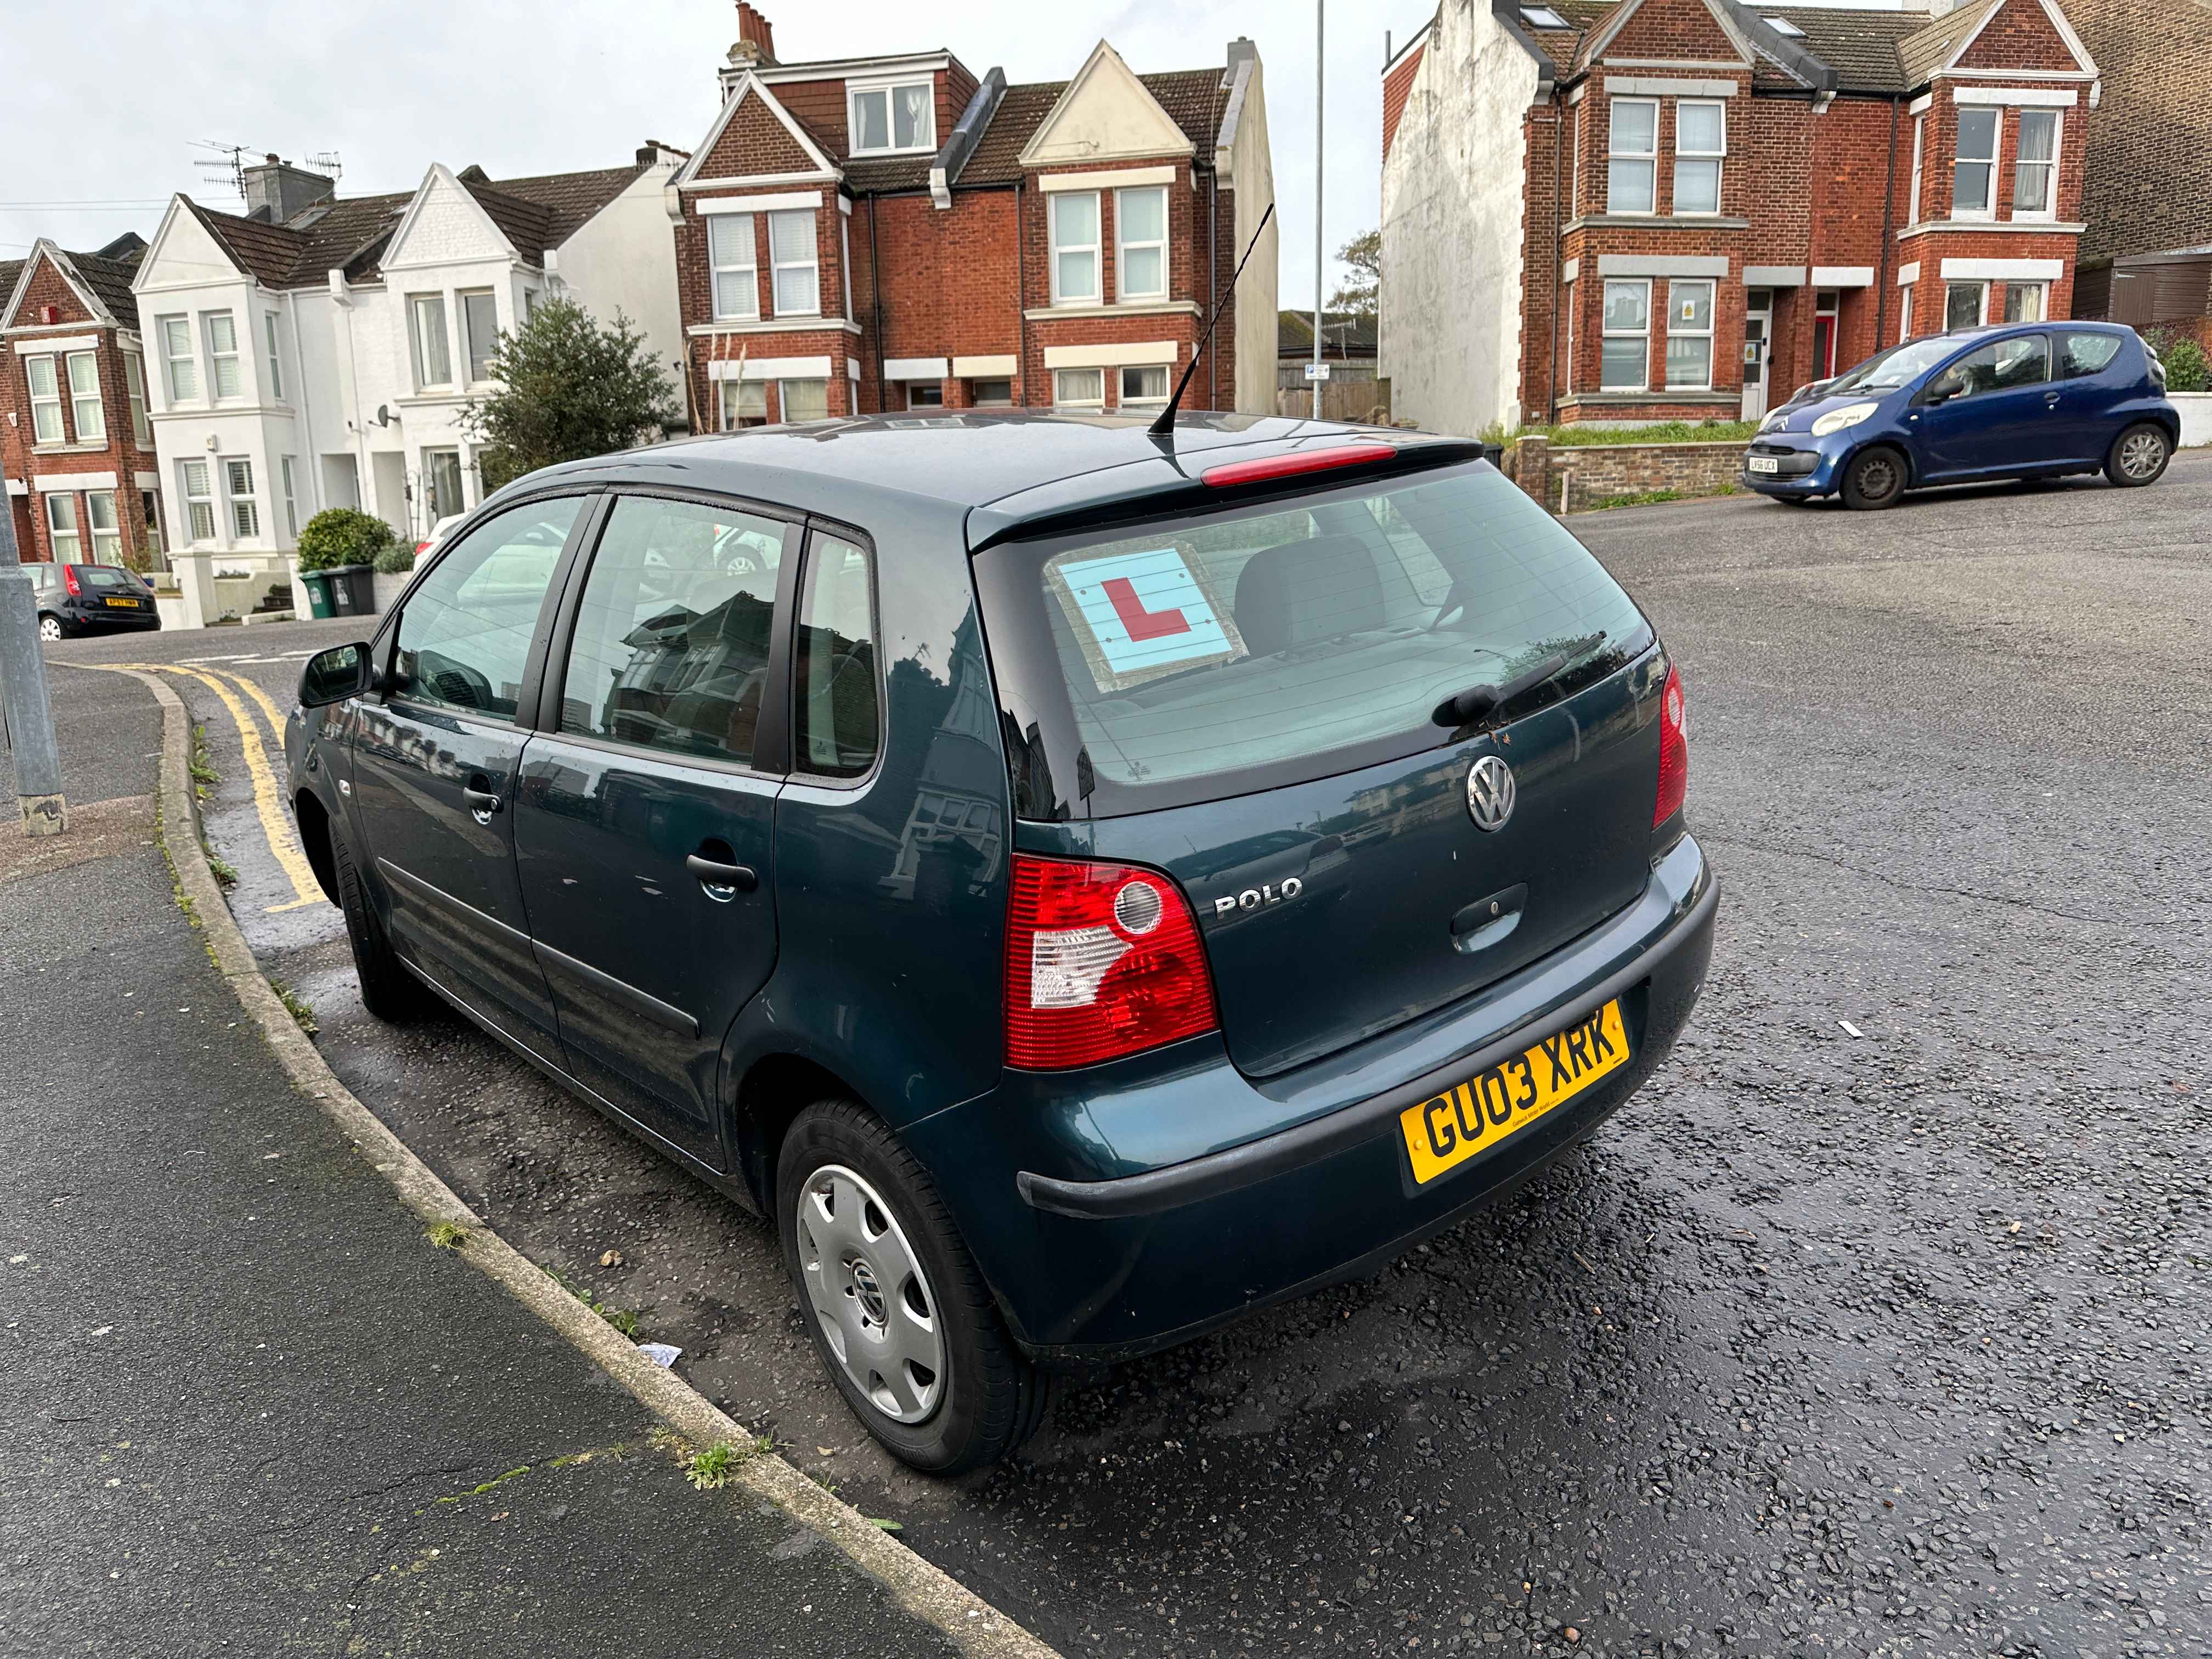 Photograph of GU03 XRK - a Green Volkswagen Polo parked in Hollingdean by a non-resident. The fourth of eight photographs supplied by the residents of Hollingdean.